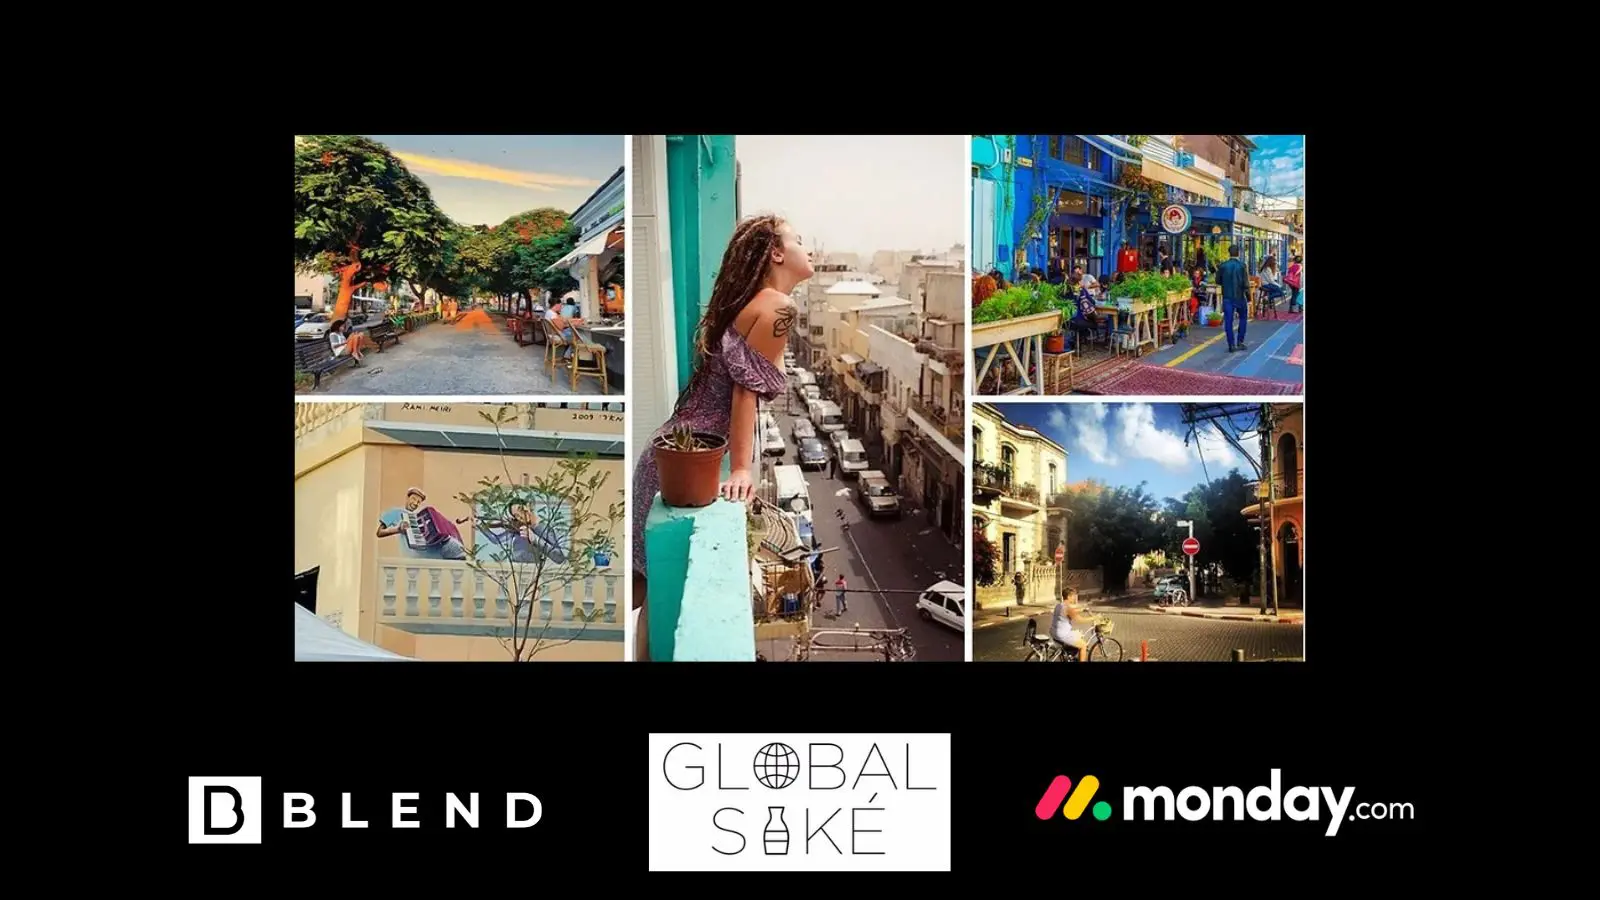 Globalsake's LocWalk TLV Event to be Hosted by BLEND and Monday.com